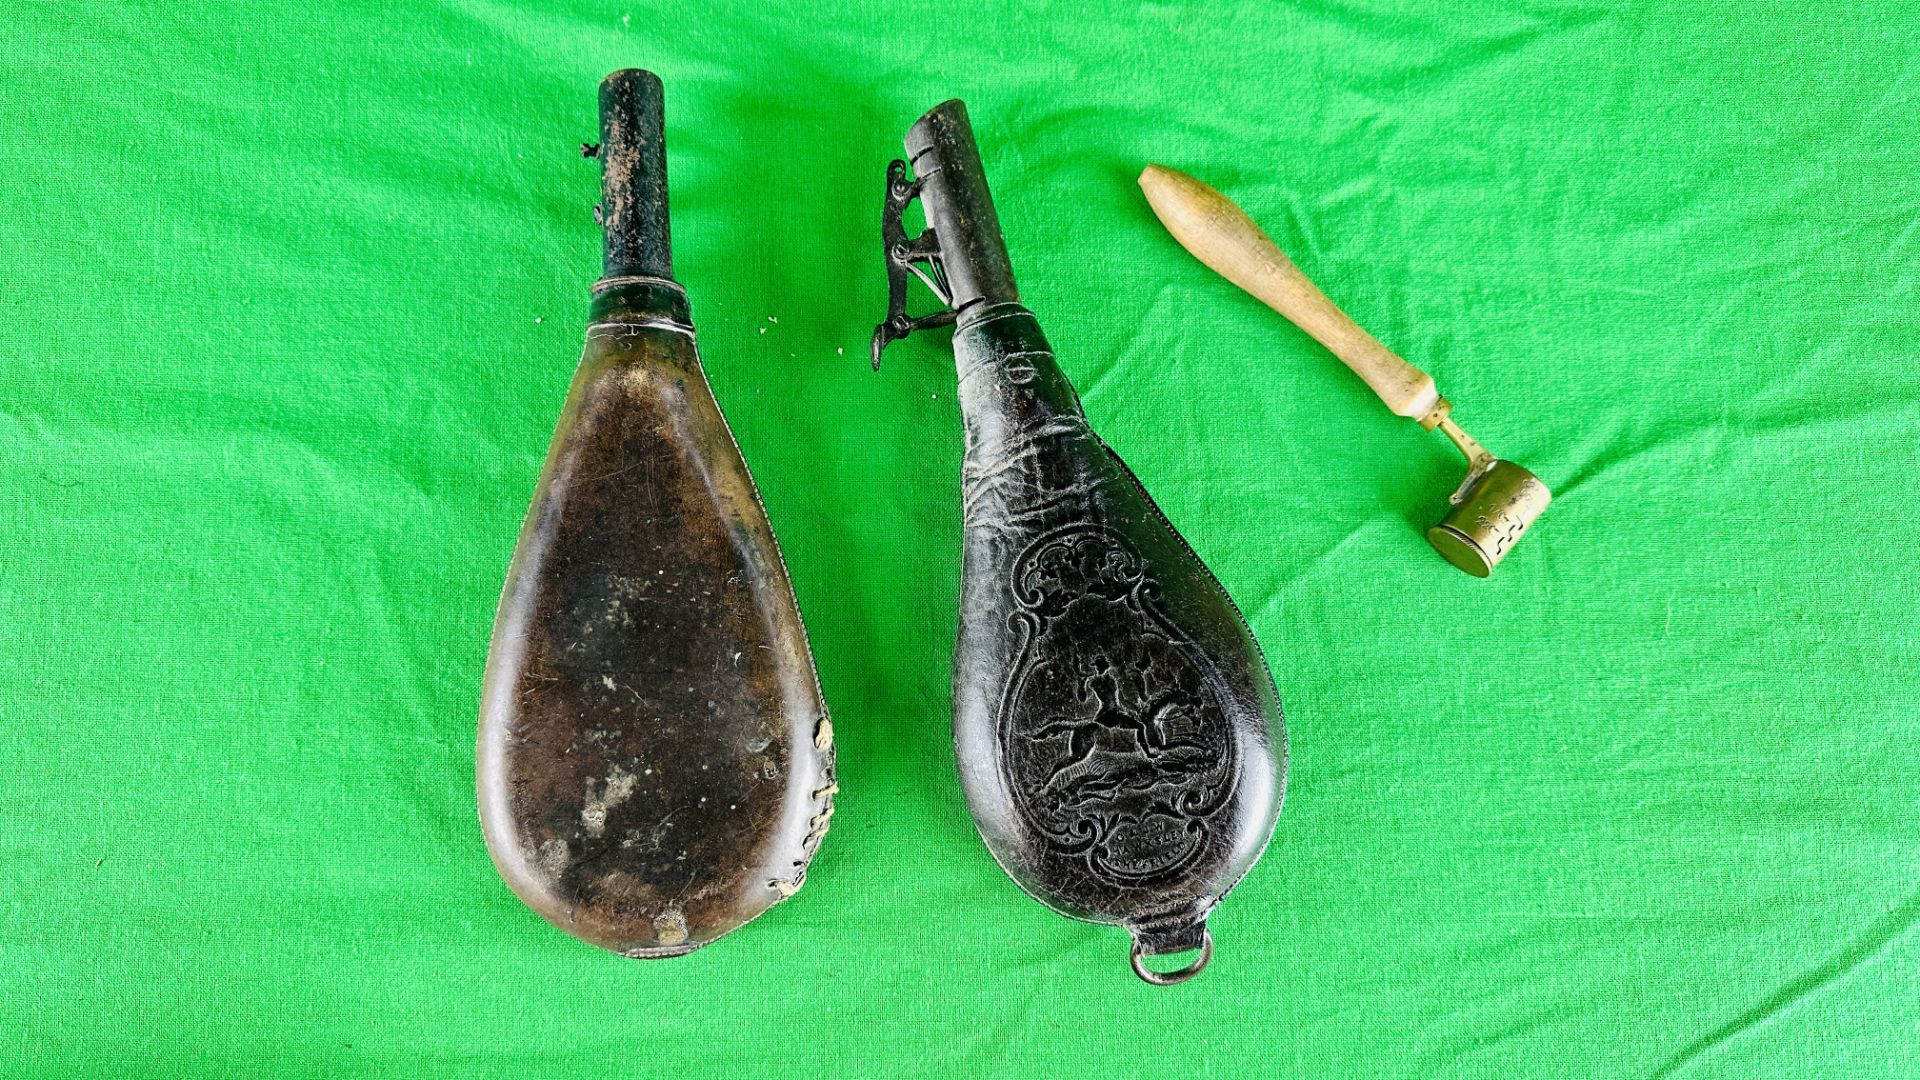 TWO ANTIQUE LEATHER POWDERED FLASKS - ONE MARKED C & J.